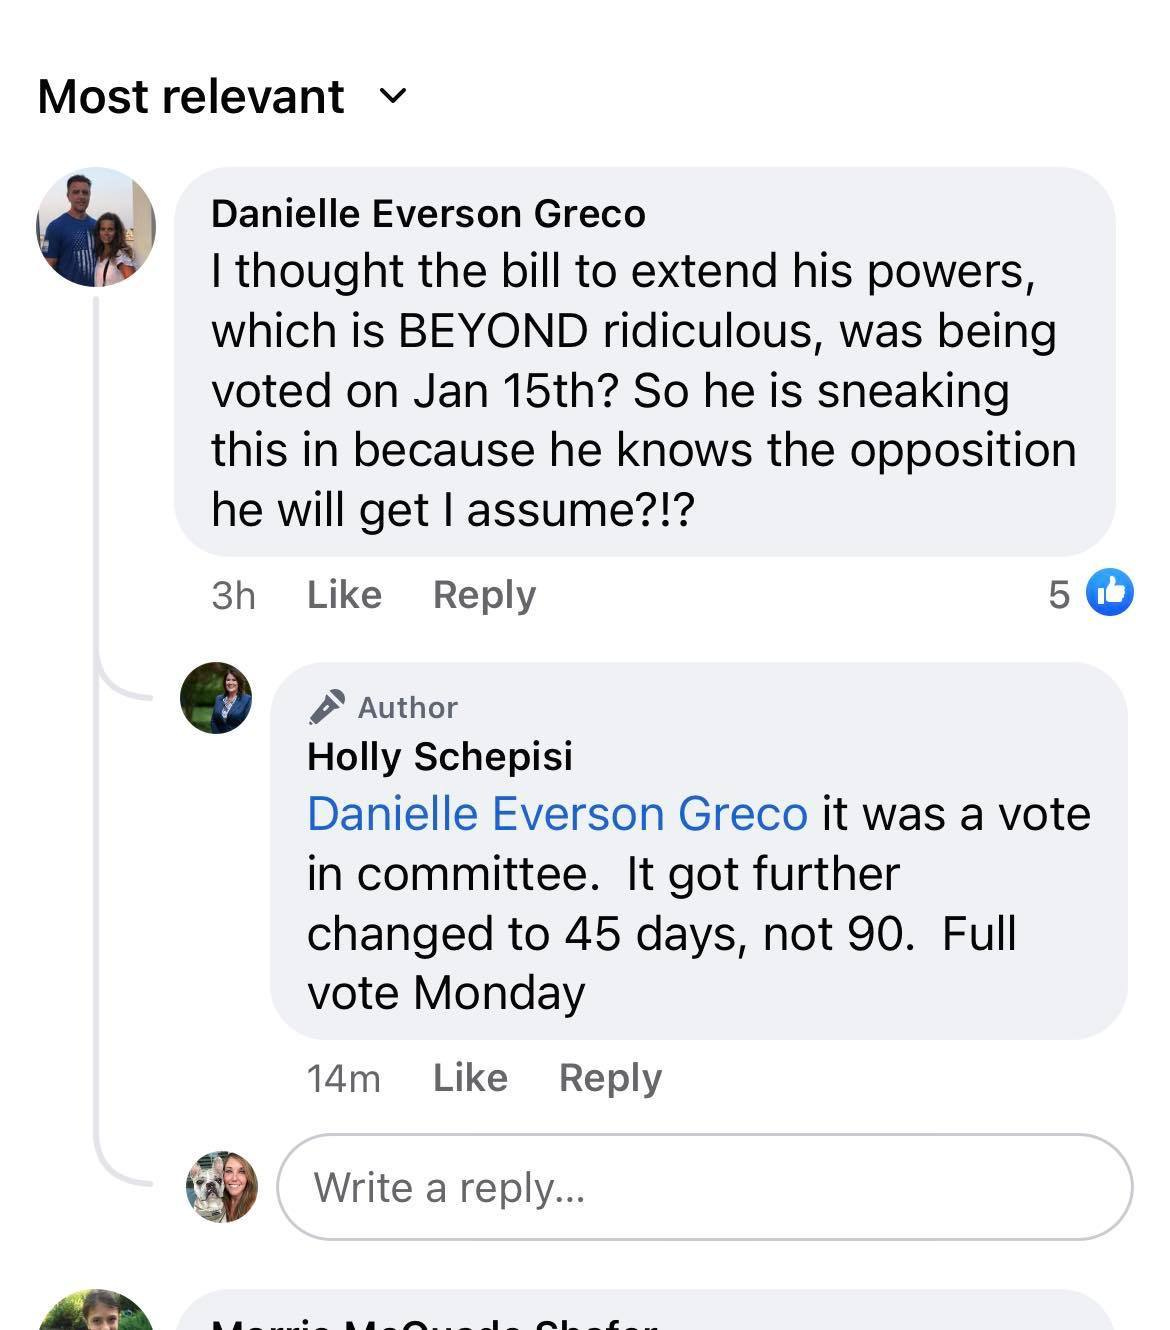 May be an image of 3 people and text that says 'Most relevant Danielle Everson Greco thought the bill to extend his powers, which is BEYOND ridiculous, was being voted on Jan 15th? So he is sneaking this in because he knows the opposition he will get assume?!? 3h Like Reply 5 Author Holly Schepisi Danielle Everson Greco it was a vote in committee. It got further changed to 45 days, not 90. vote Monday Full 14m Like Reply Write a reply...'